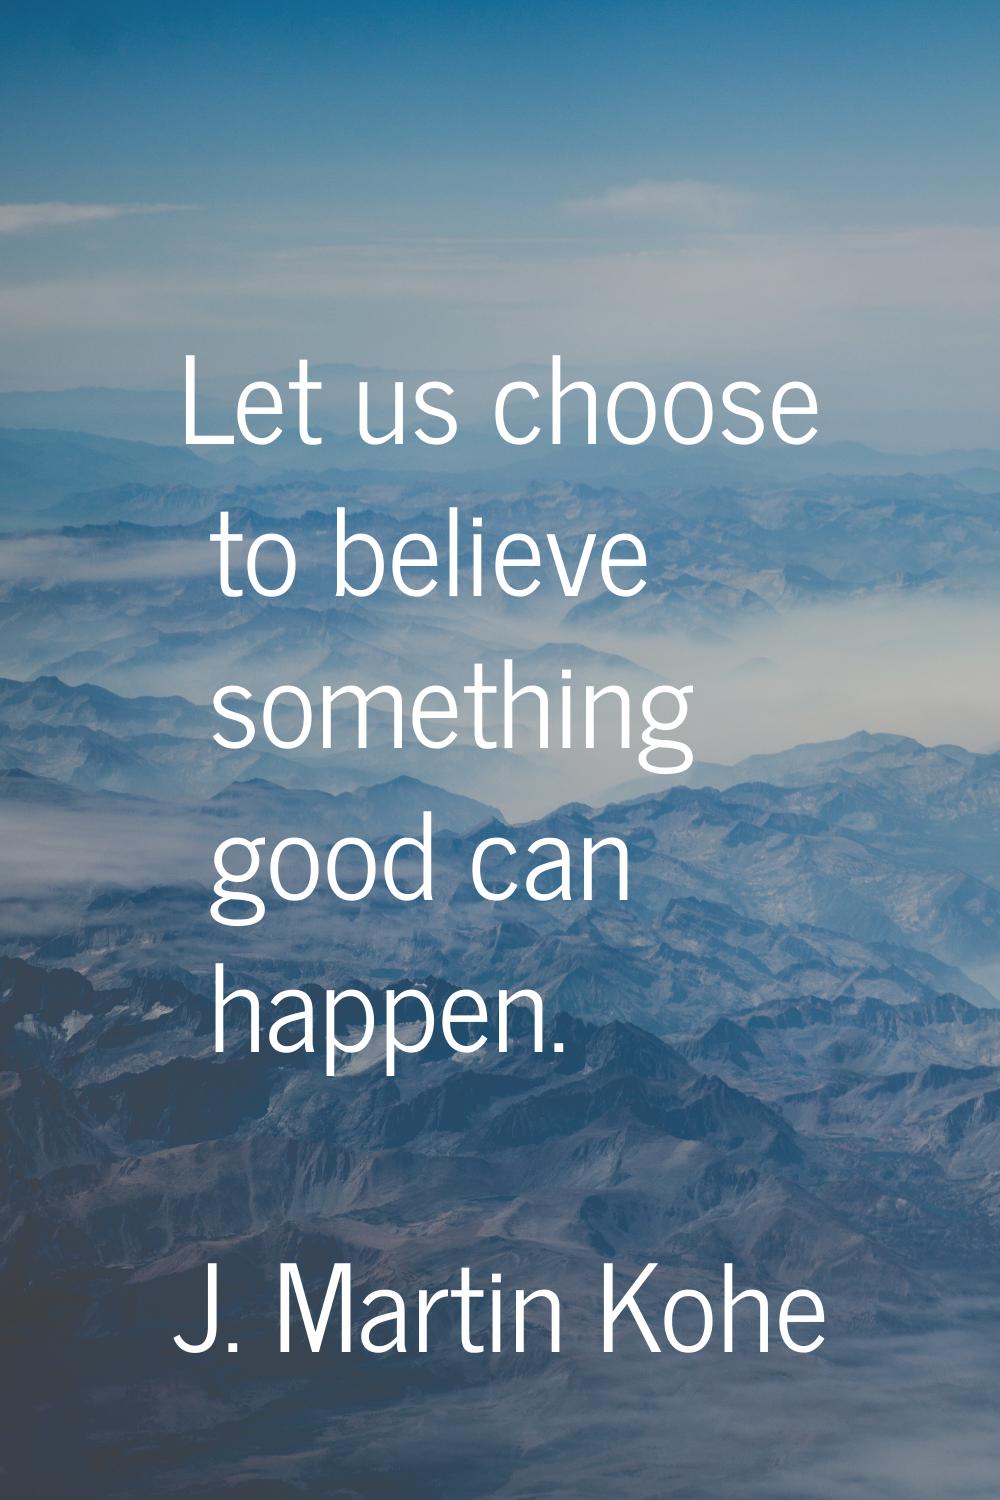 Let us choose to believe something good can happen.